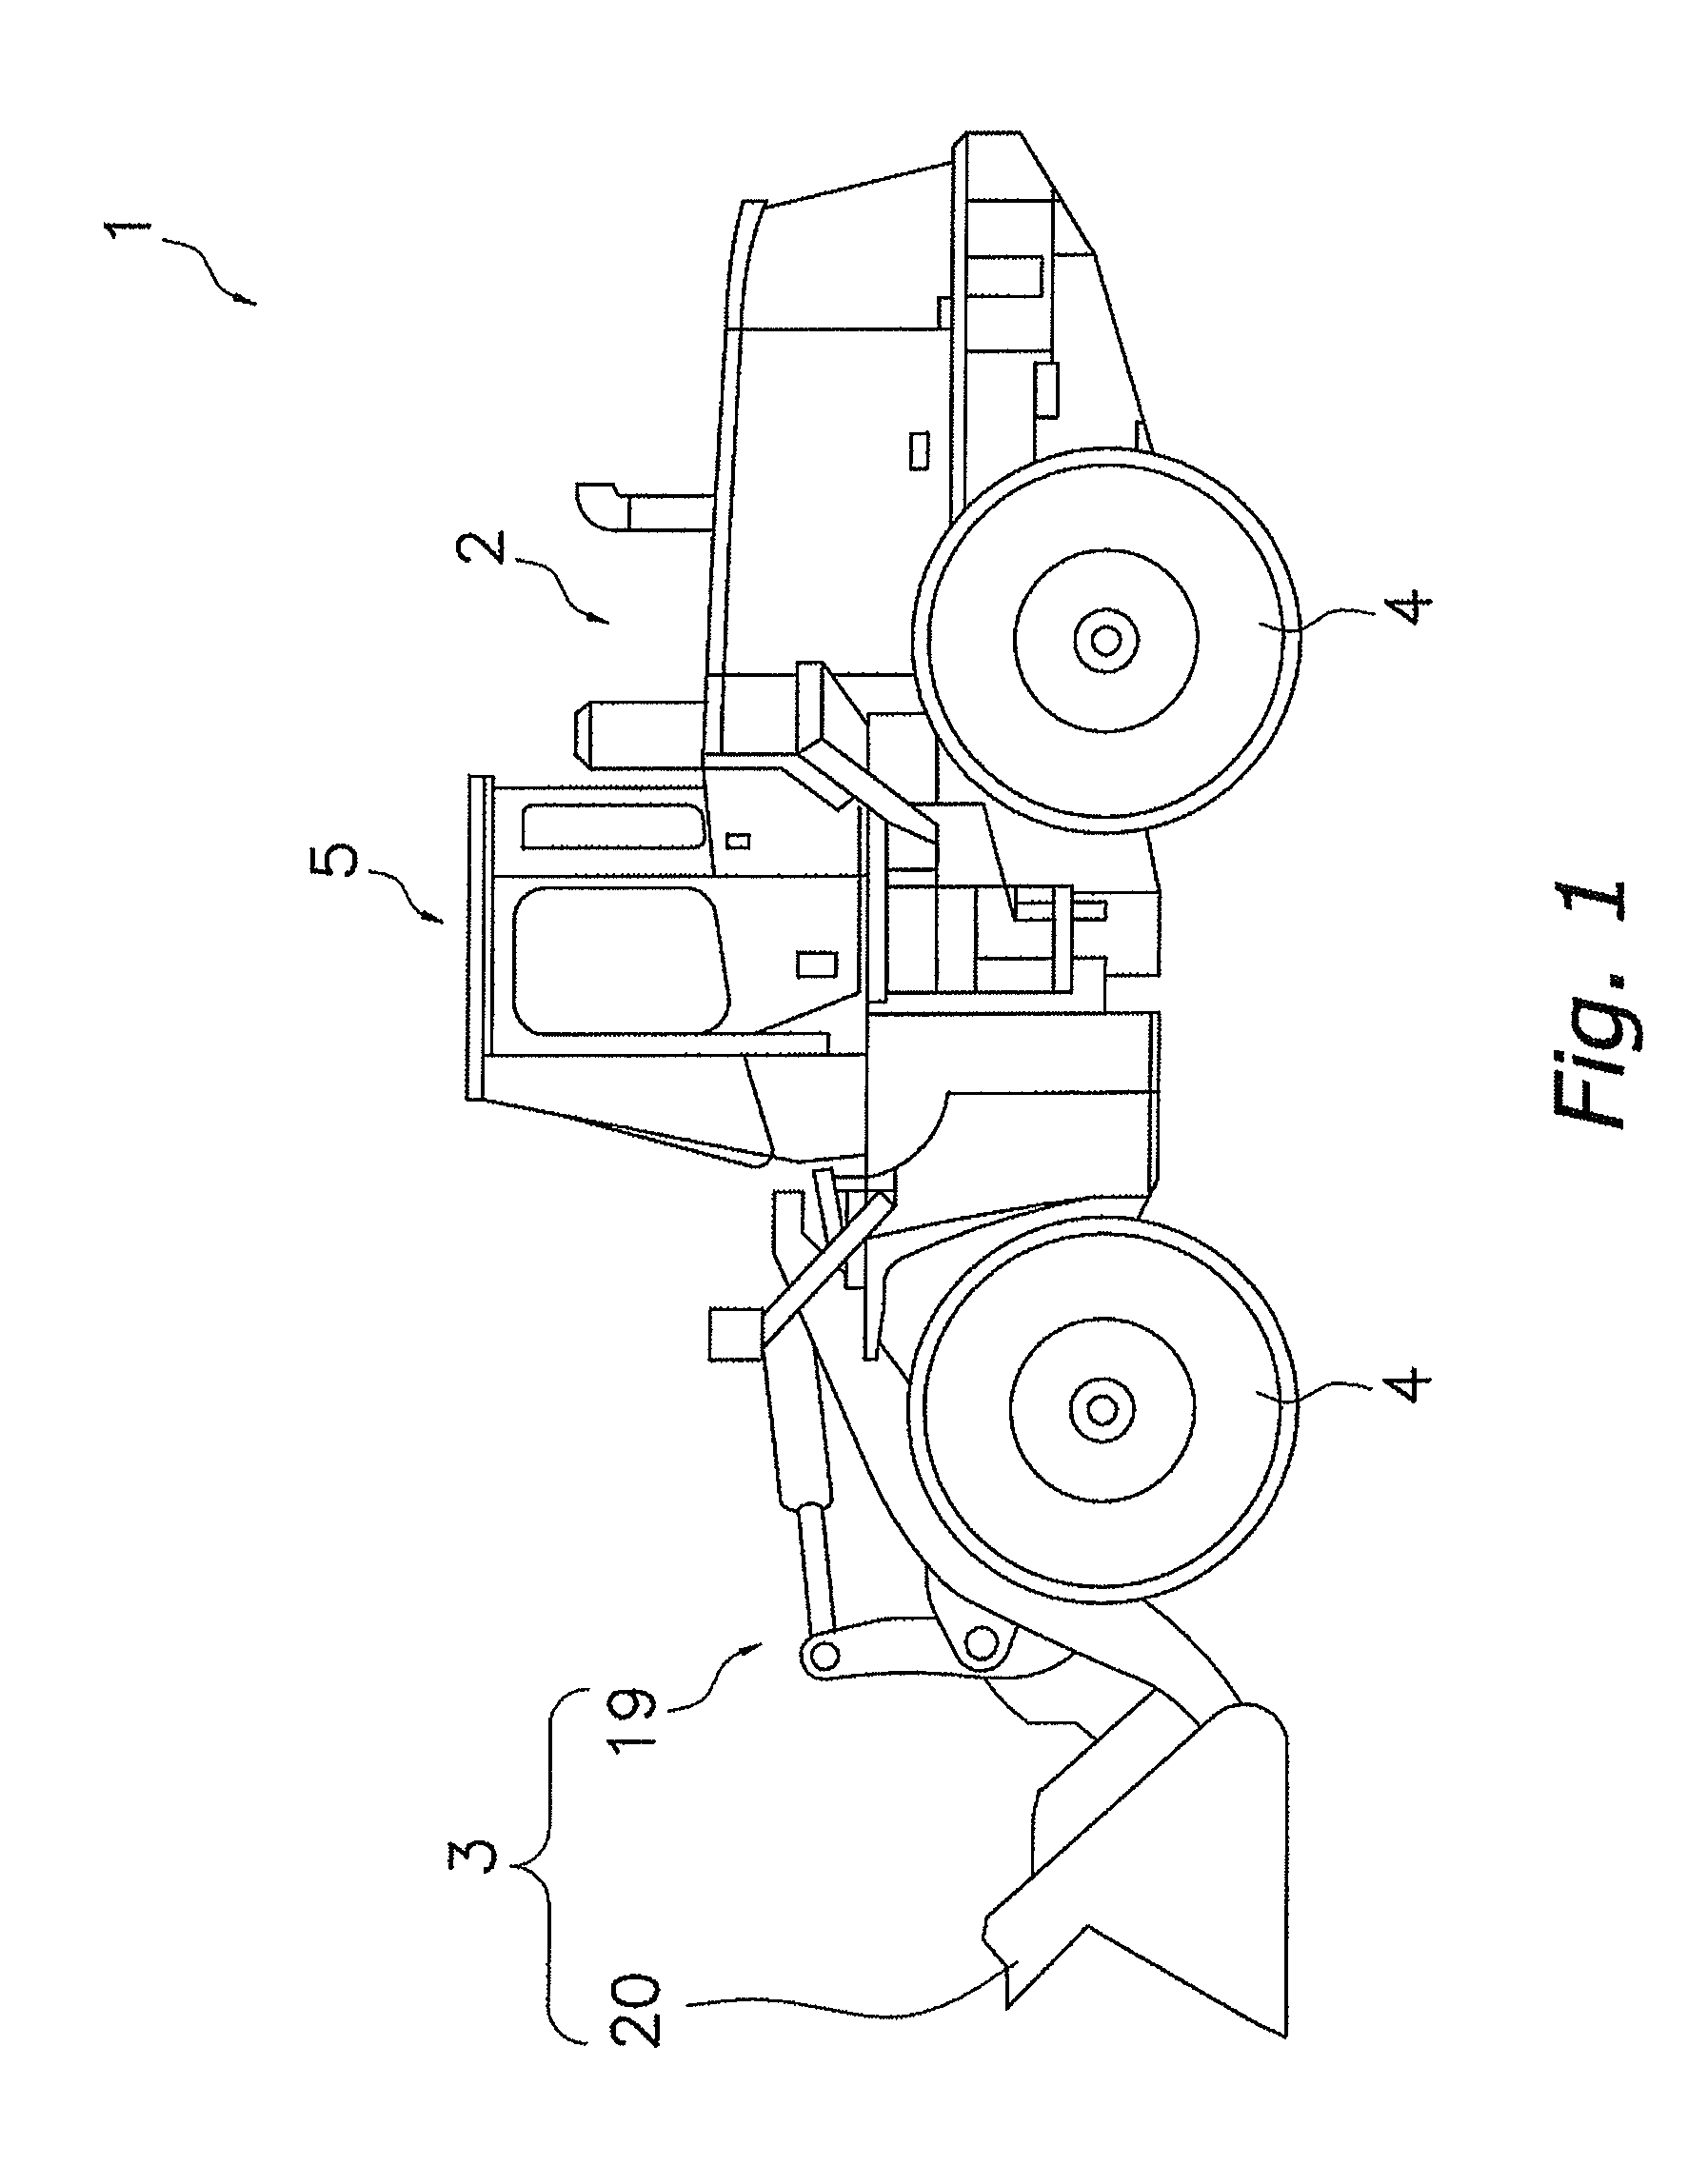 Engine control device for working vehicle